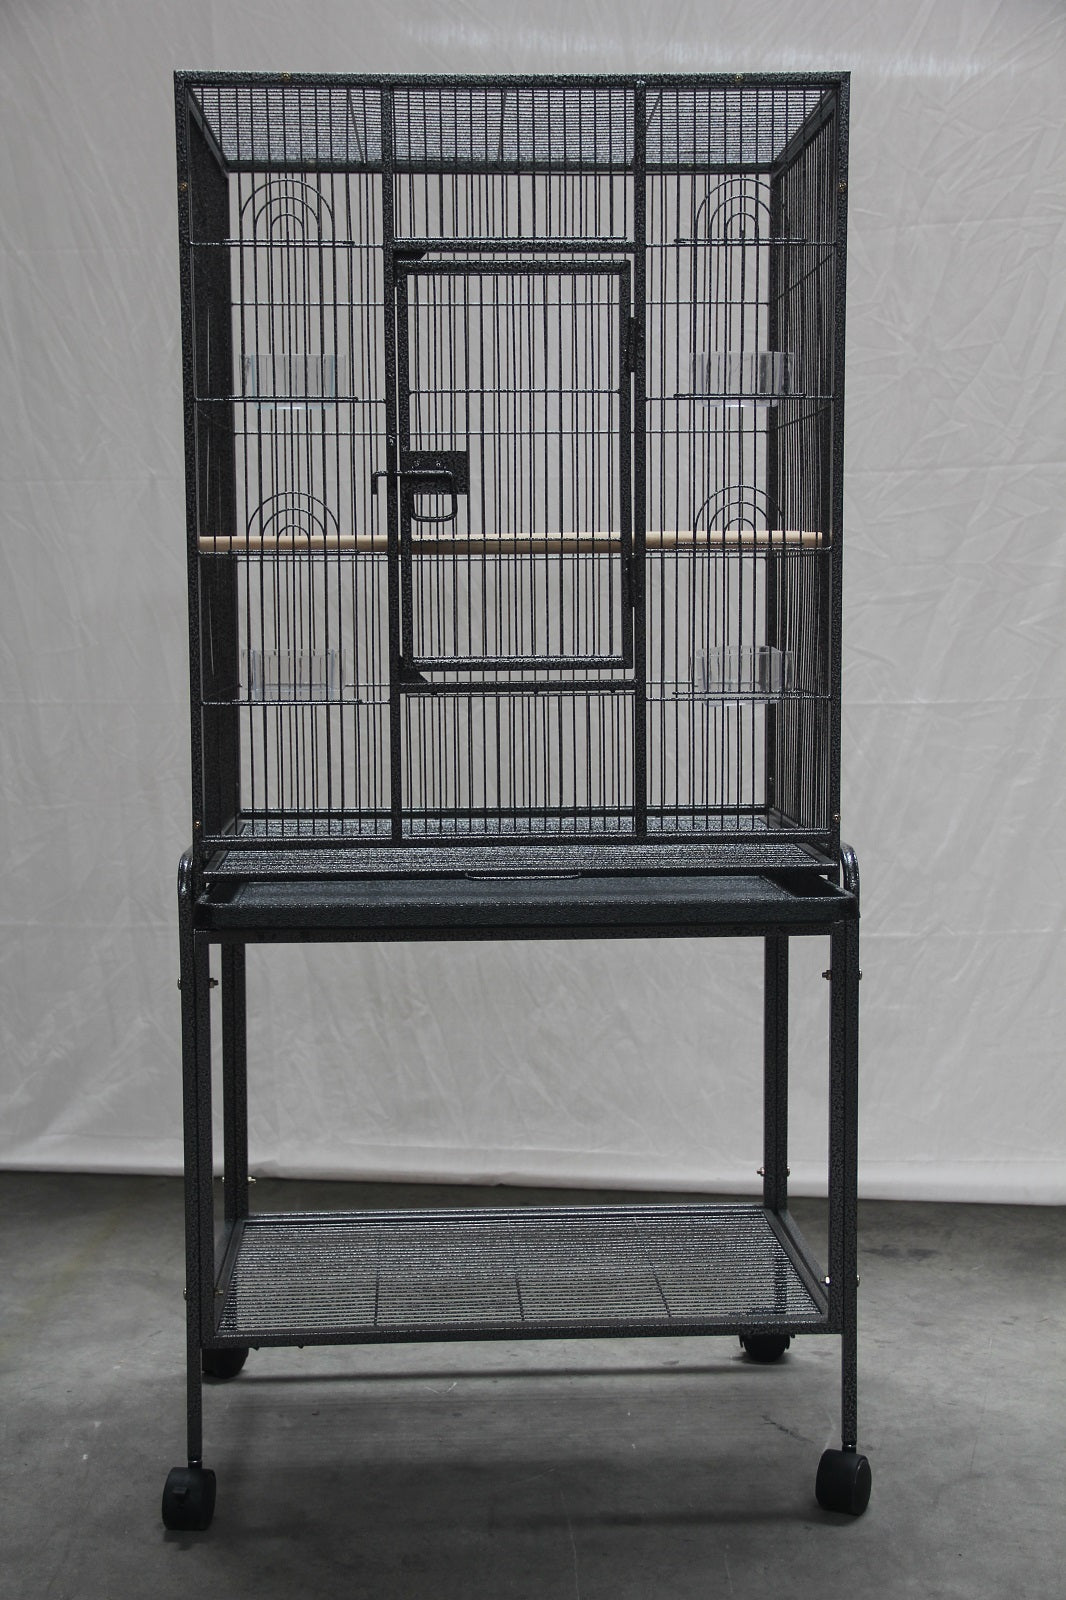 135cm Bird Cage Parrot Aviary Pet Stand-alone Budgie Perch Castor Wheels